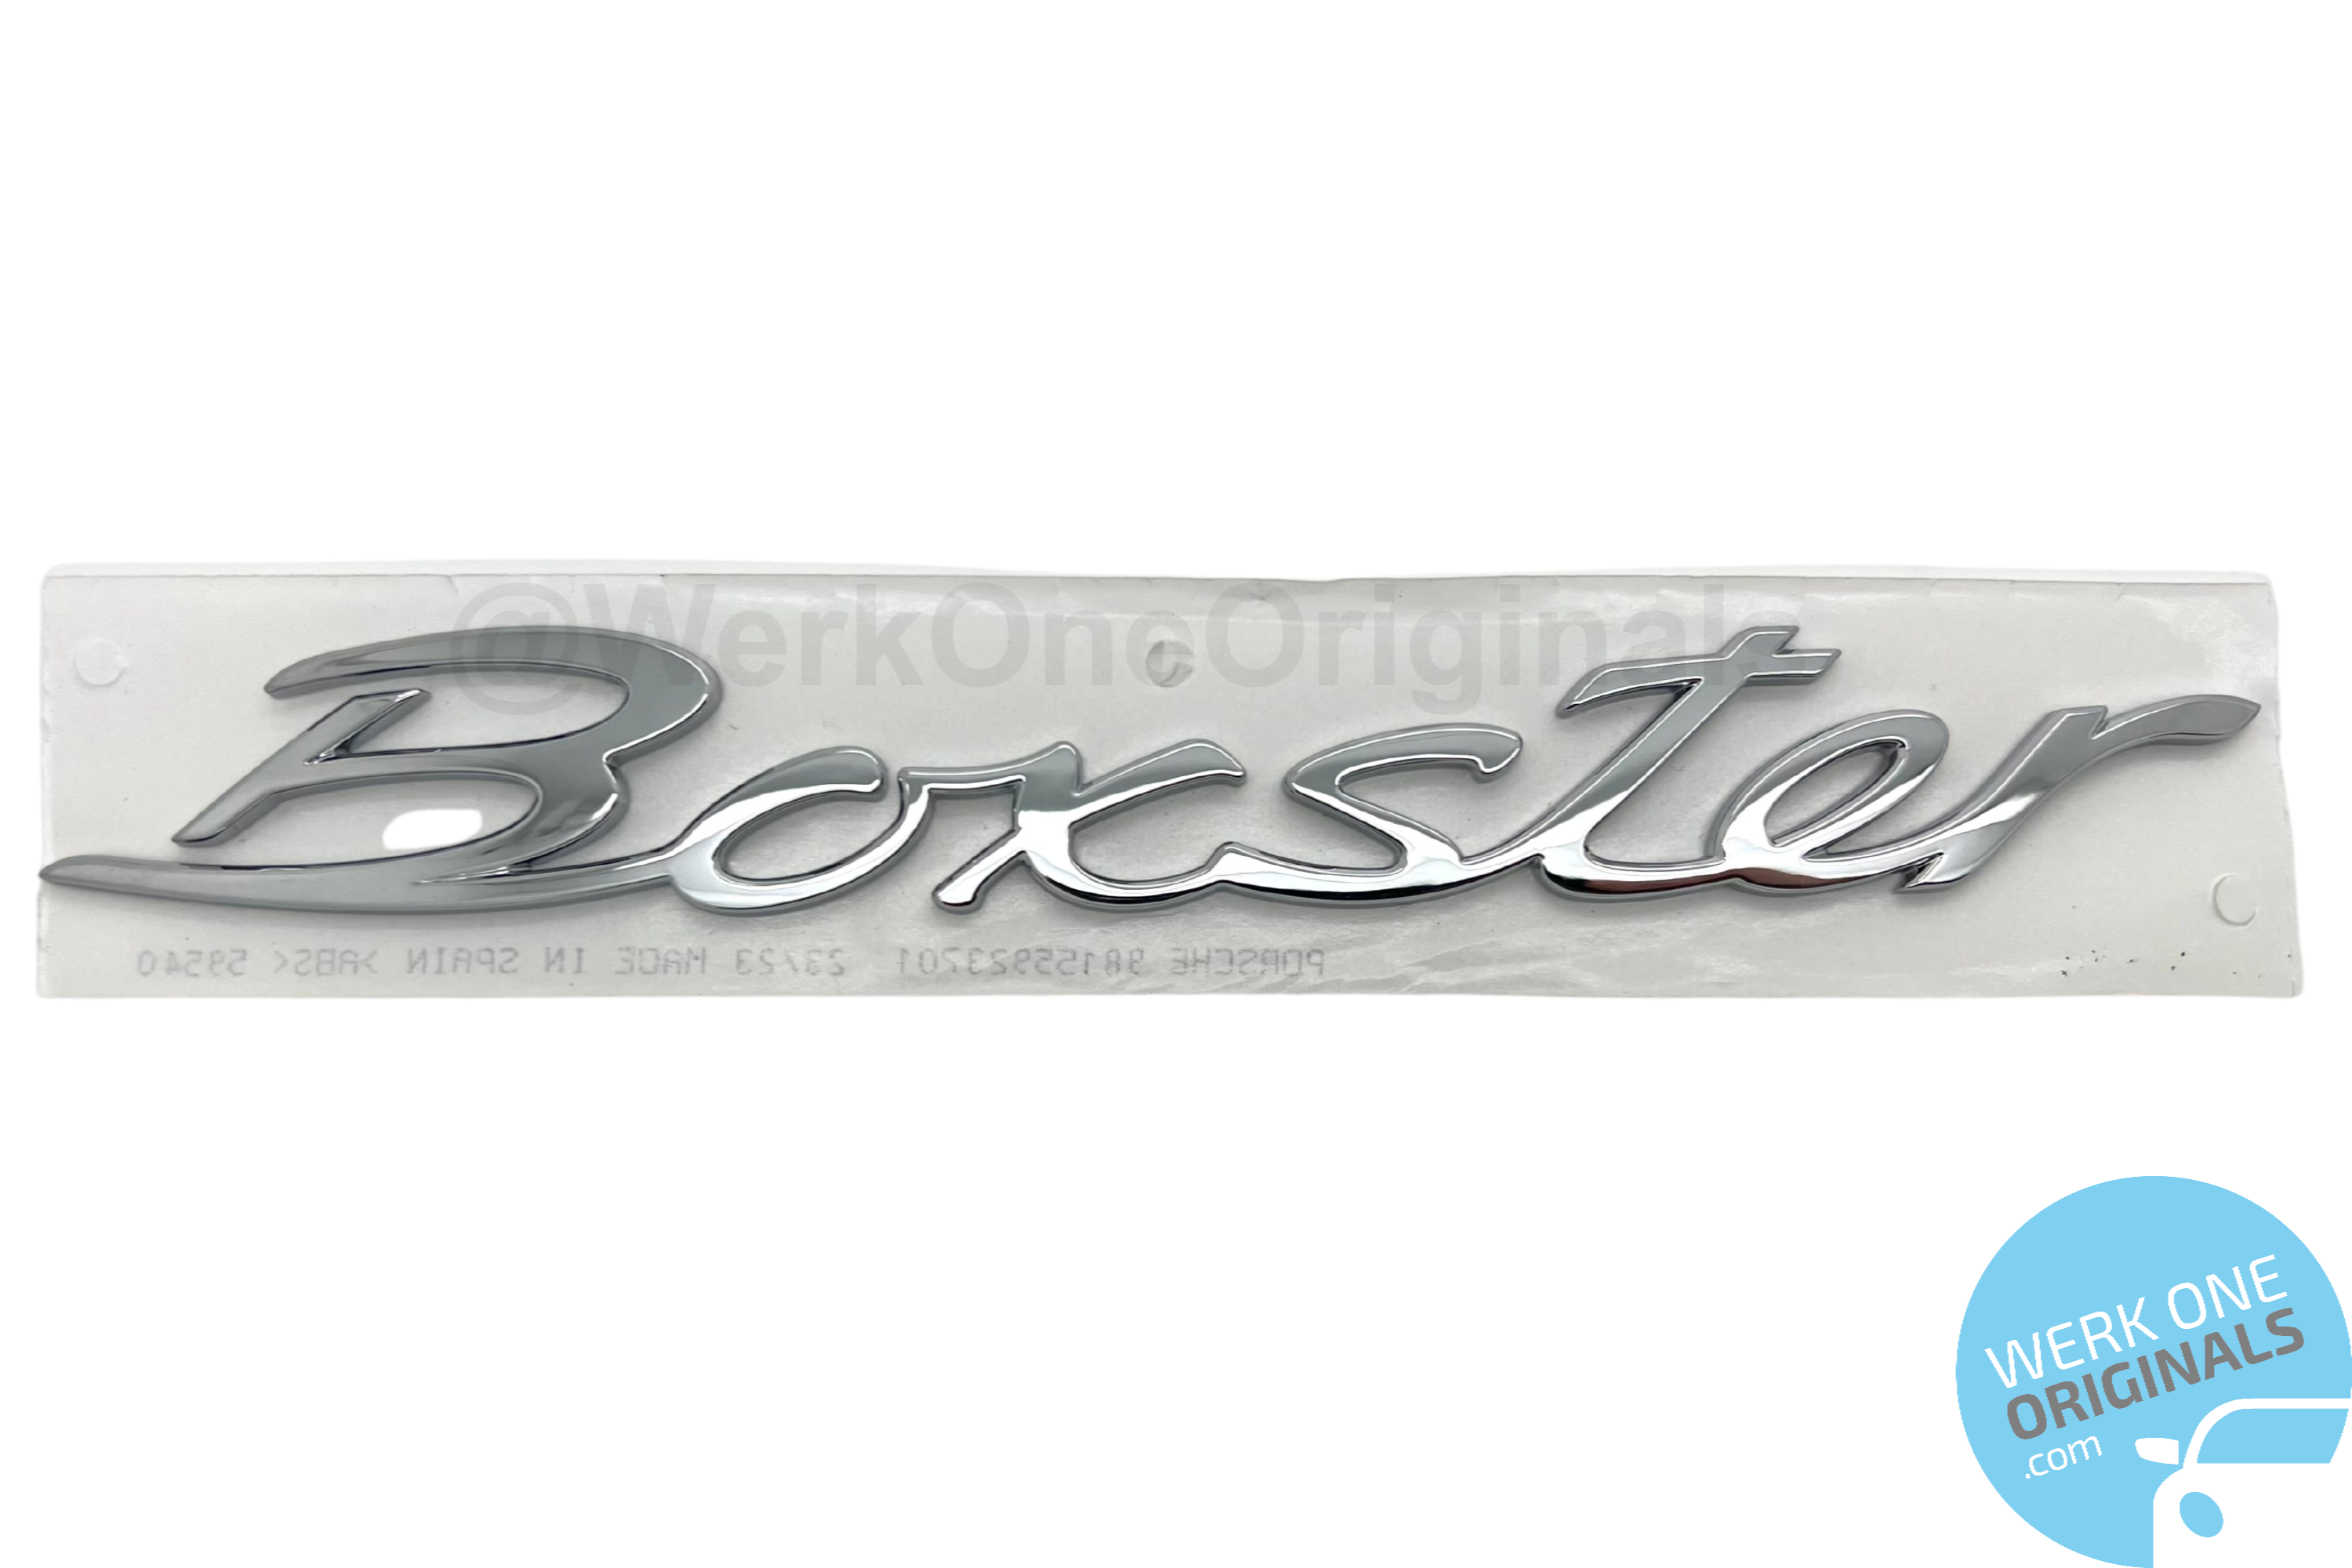 Porsche Official 'Boxster' Rear Badge Decal in Chrome Silver for Boxster Type 981 Models